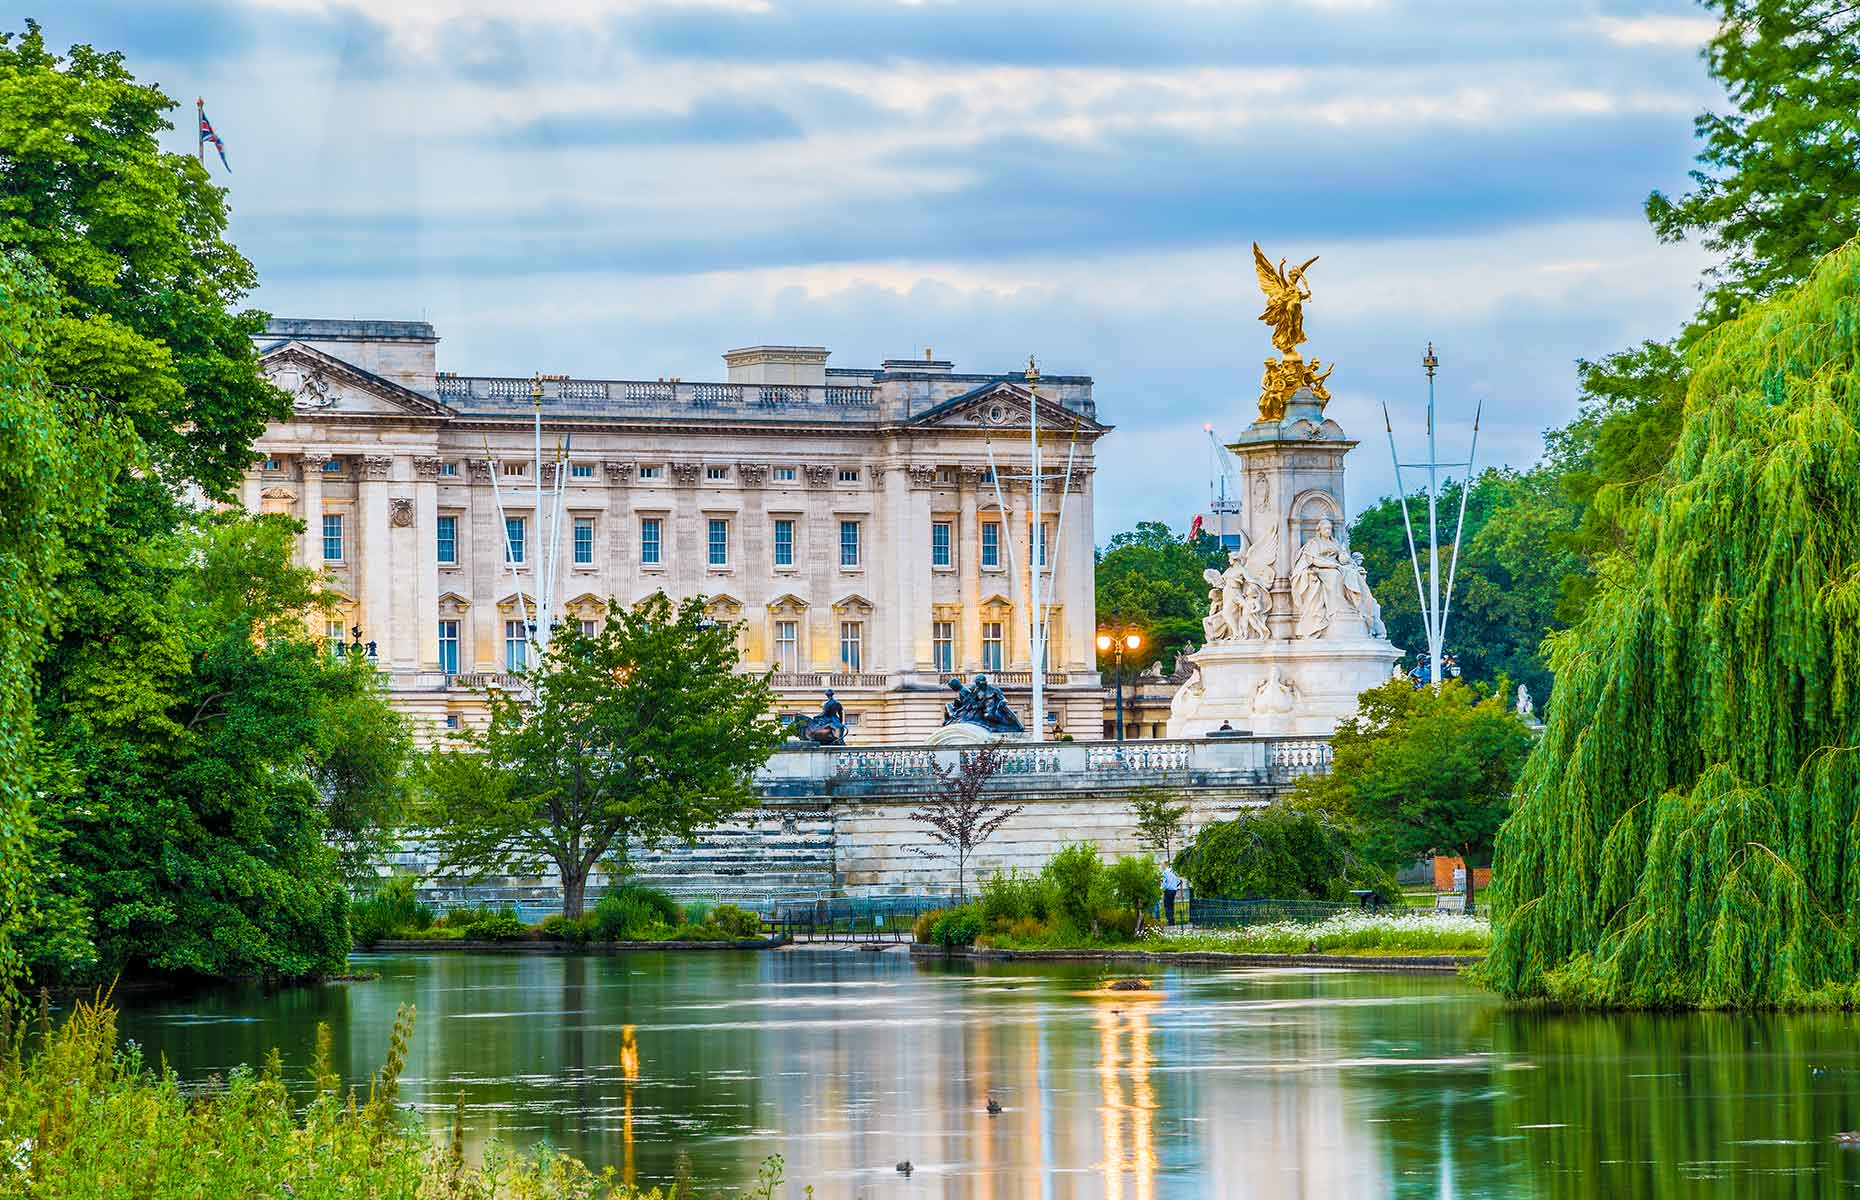 Buckingham Palace is just a short walk from St Ermin's hotel